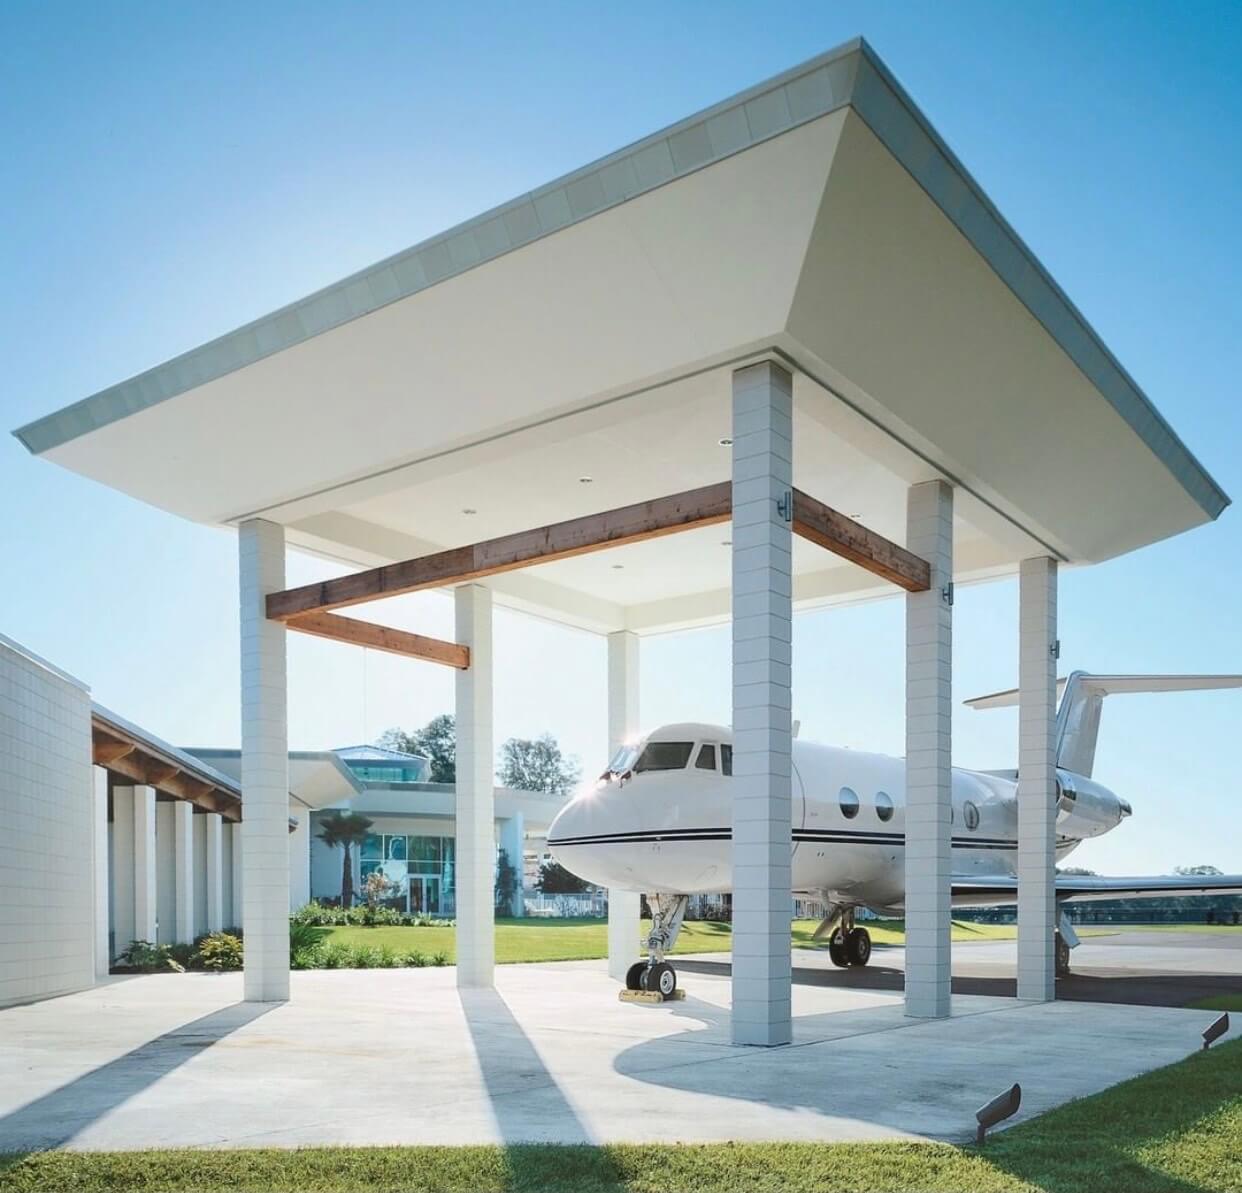 John Travolta's one of a kind "airport house"